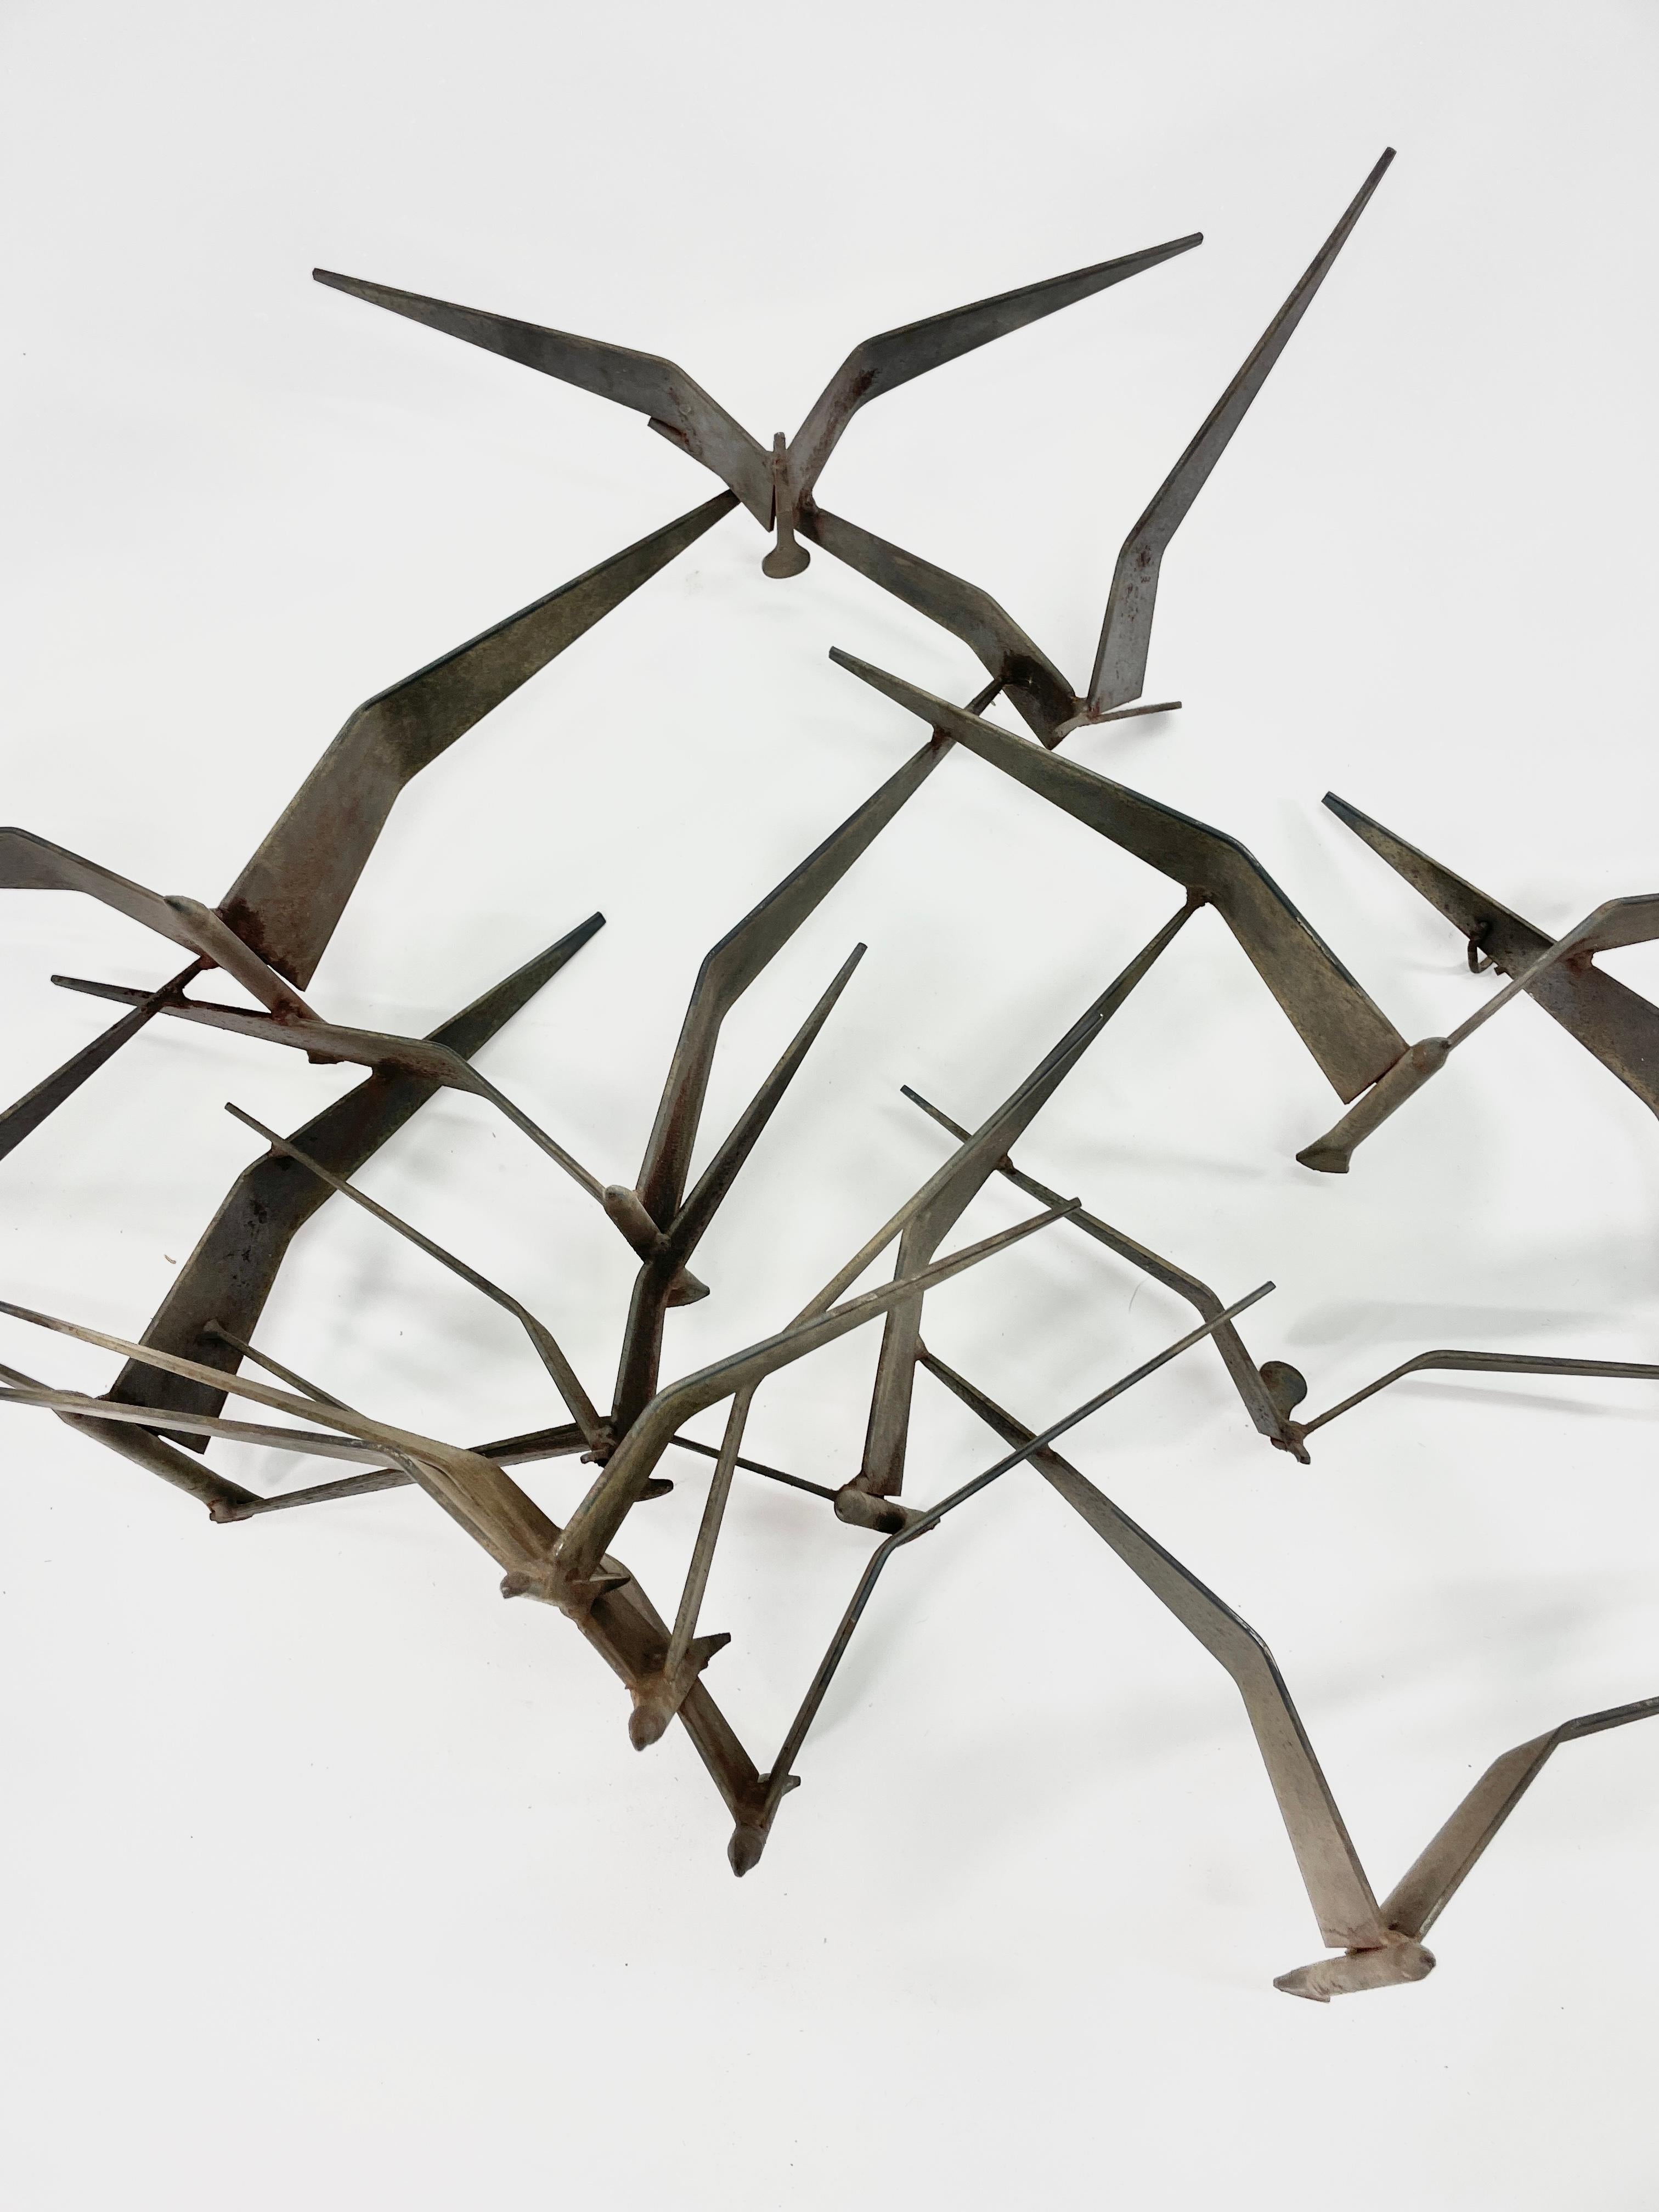  This incredible sculpture  of a flock of flying birds with wing, beak and body details. This sculpture adds depth and movement for a wall and is a great example by artist Curtis Jere. A wonderful sculptural piece by the iconic metal crafters of the